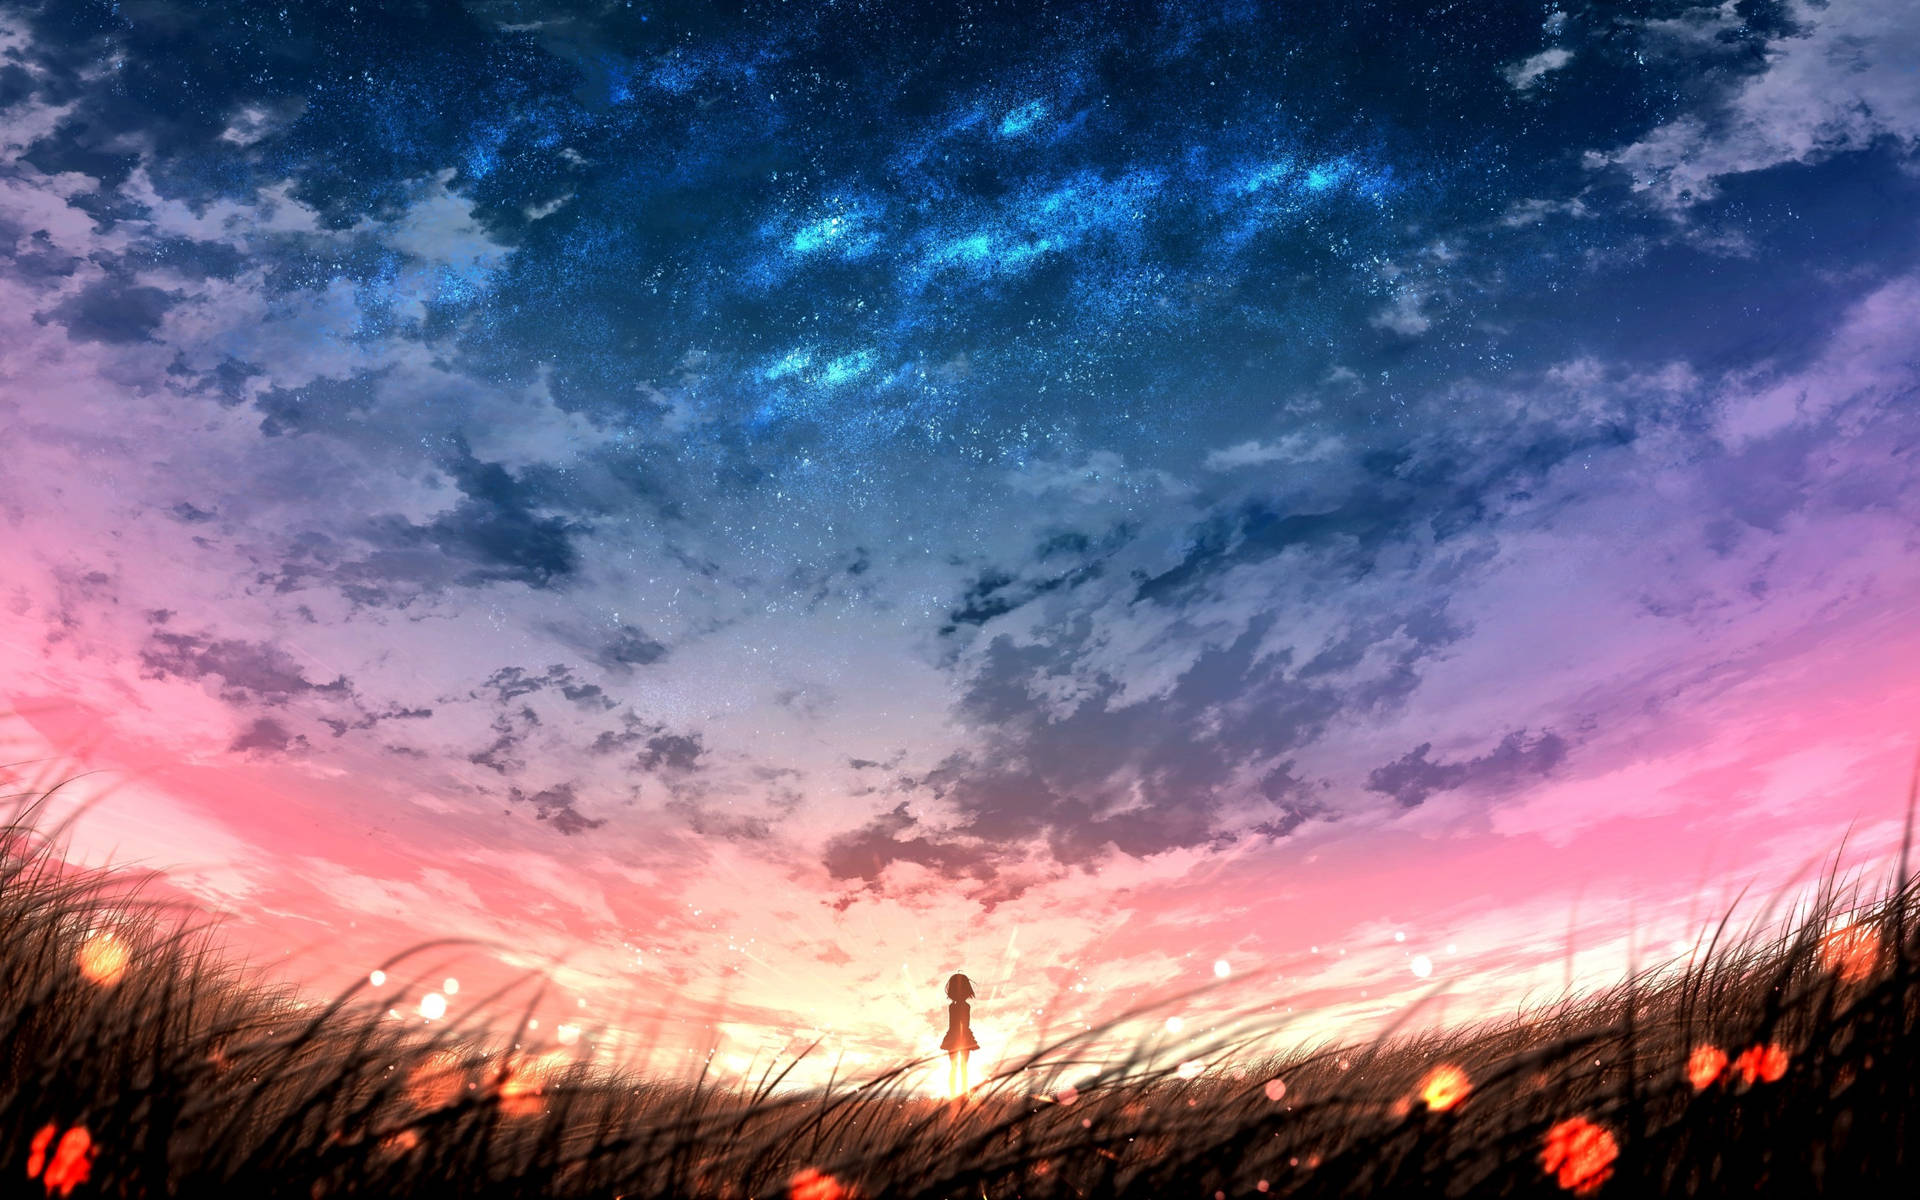 Sunset Sky With Galaxy Background